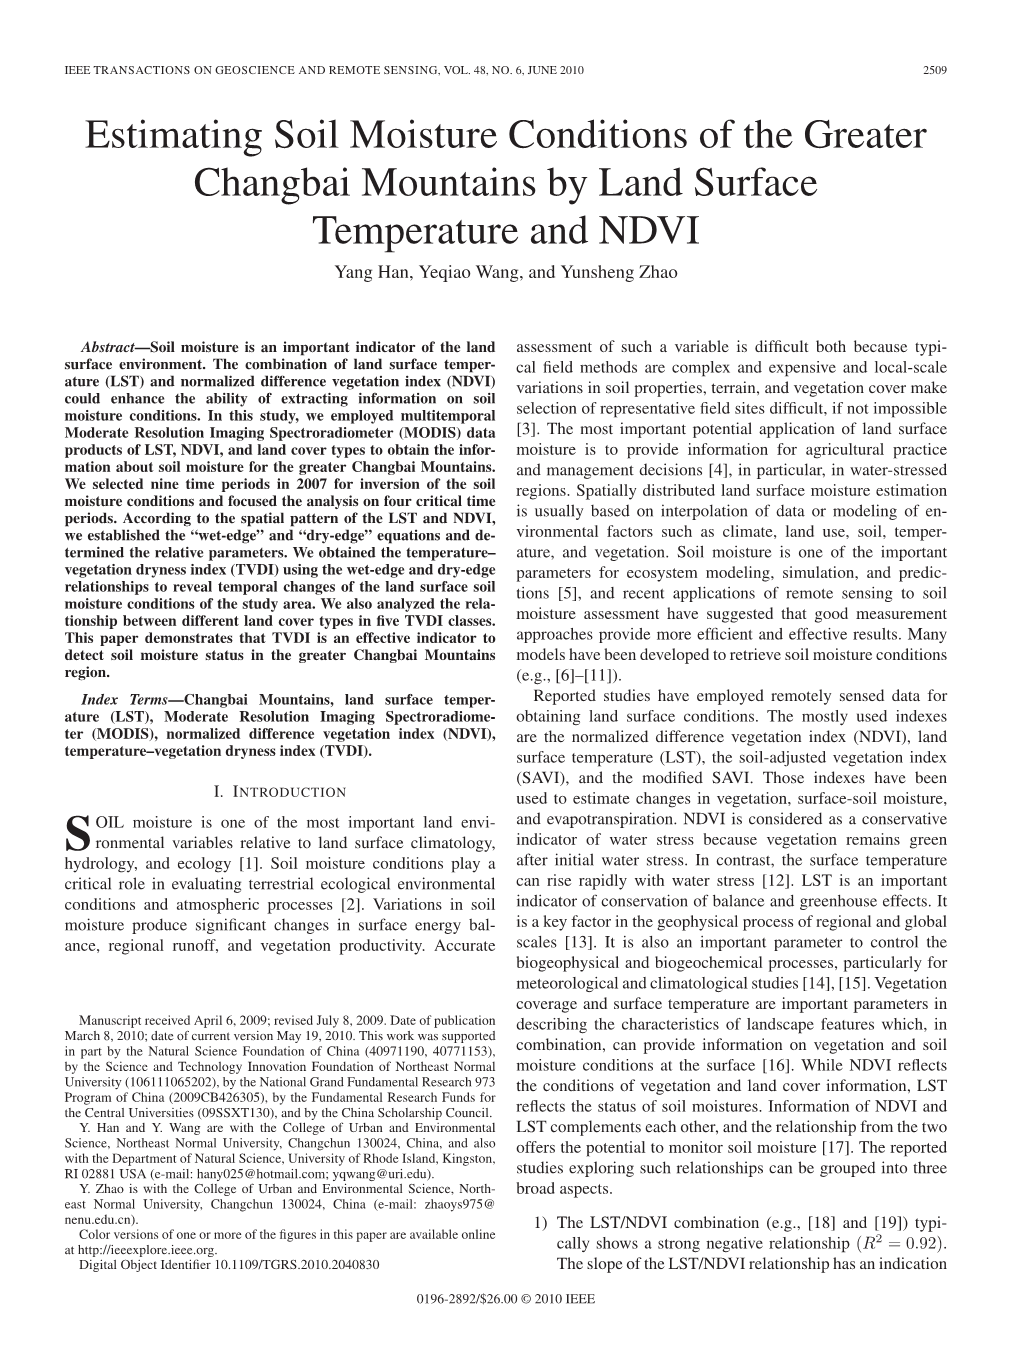 Estimating Soil Moisture Conditions of the Greater Changbai Mountains by Land Surface Temperature and NDVI Yang Han, Yeqiao Wang, and Yunsheng Zhao